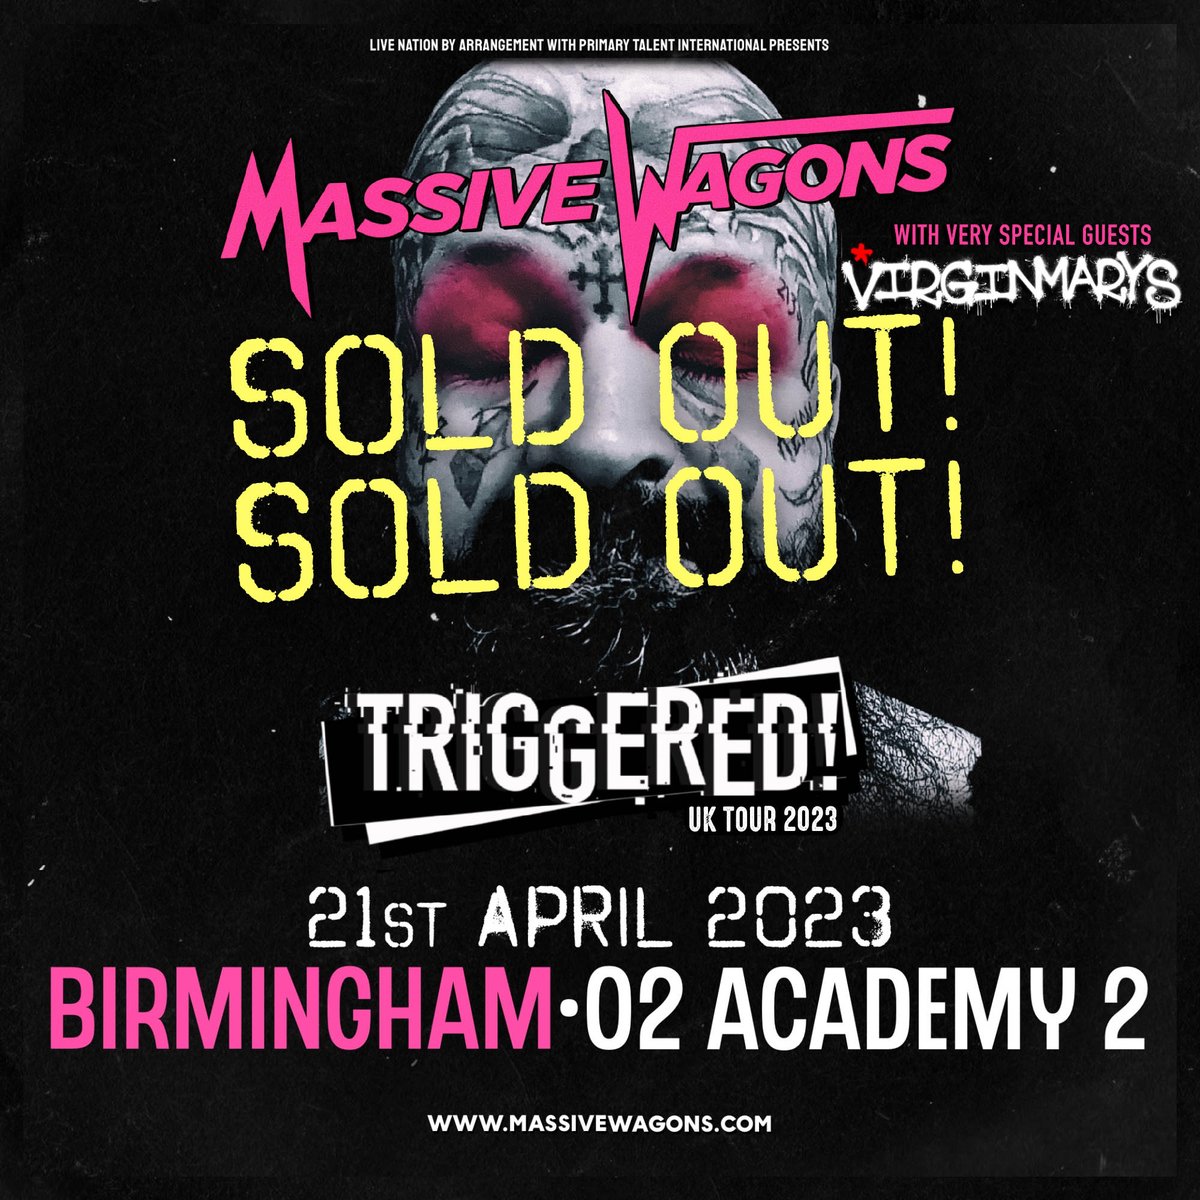 Our show in @o2academybham with @thevirginmarys has officially SOLD OUT! Baz is getting plenty of rest and recovering. Thank you to everyone for all the love and positivity you’ve been sending our way. We cannot wait to play this show. #massivewagons #birmingham